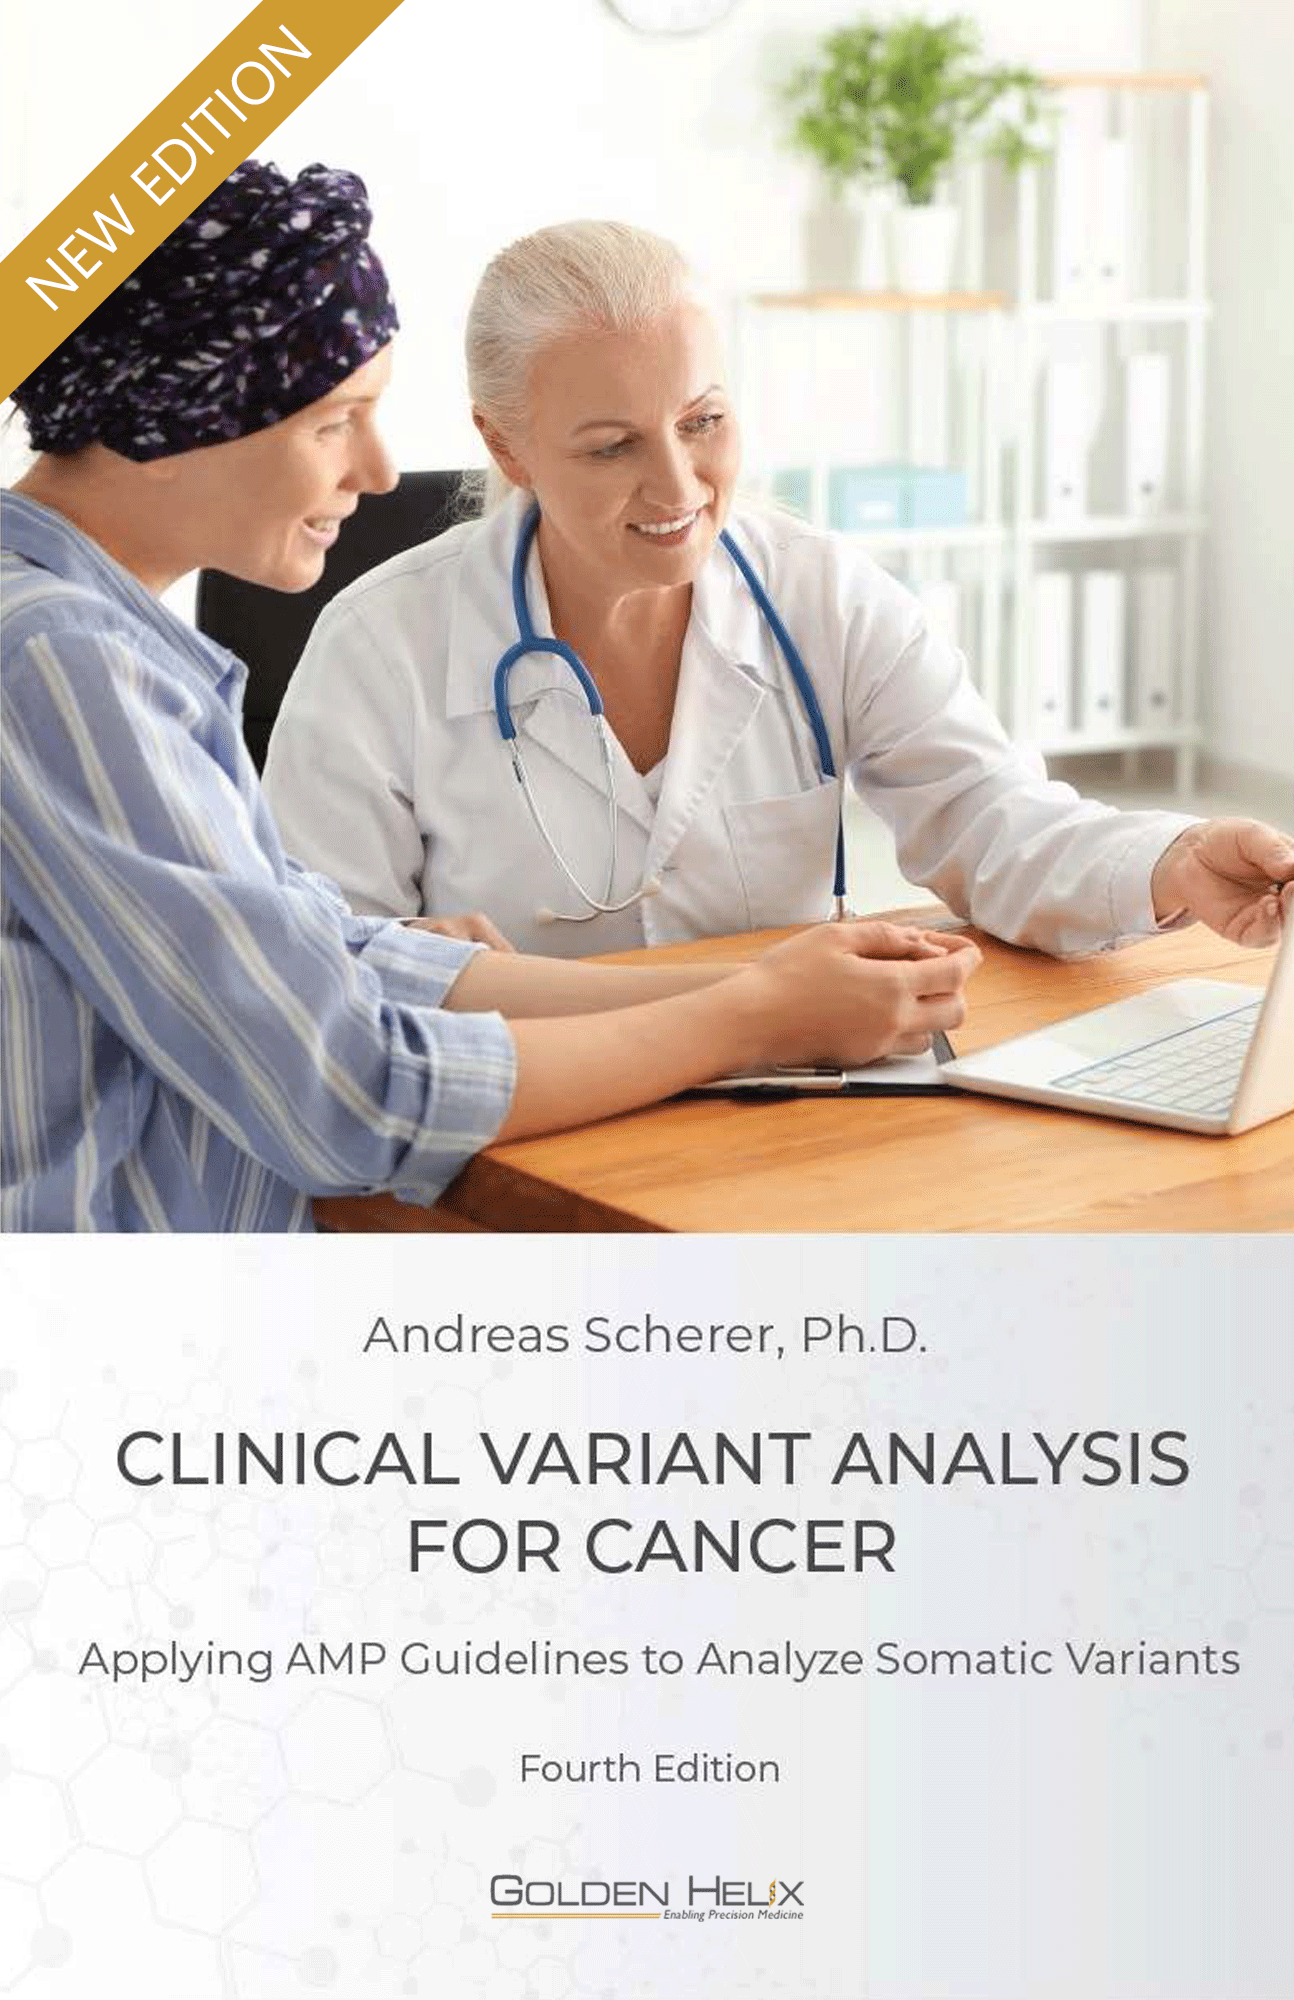 Clinical Variant Analysis for Cancer